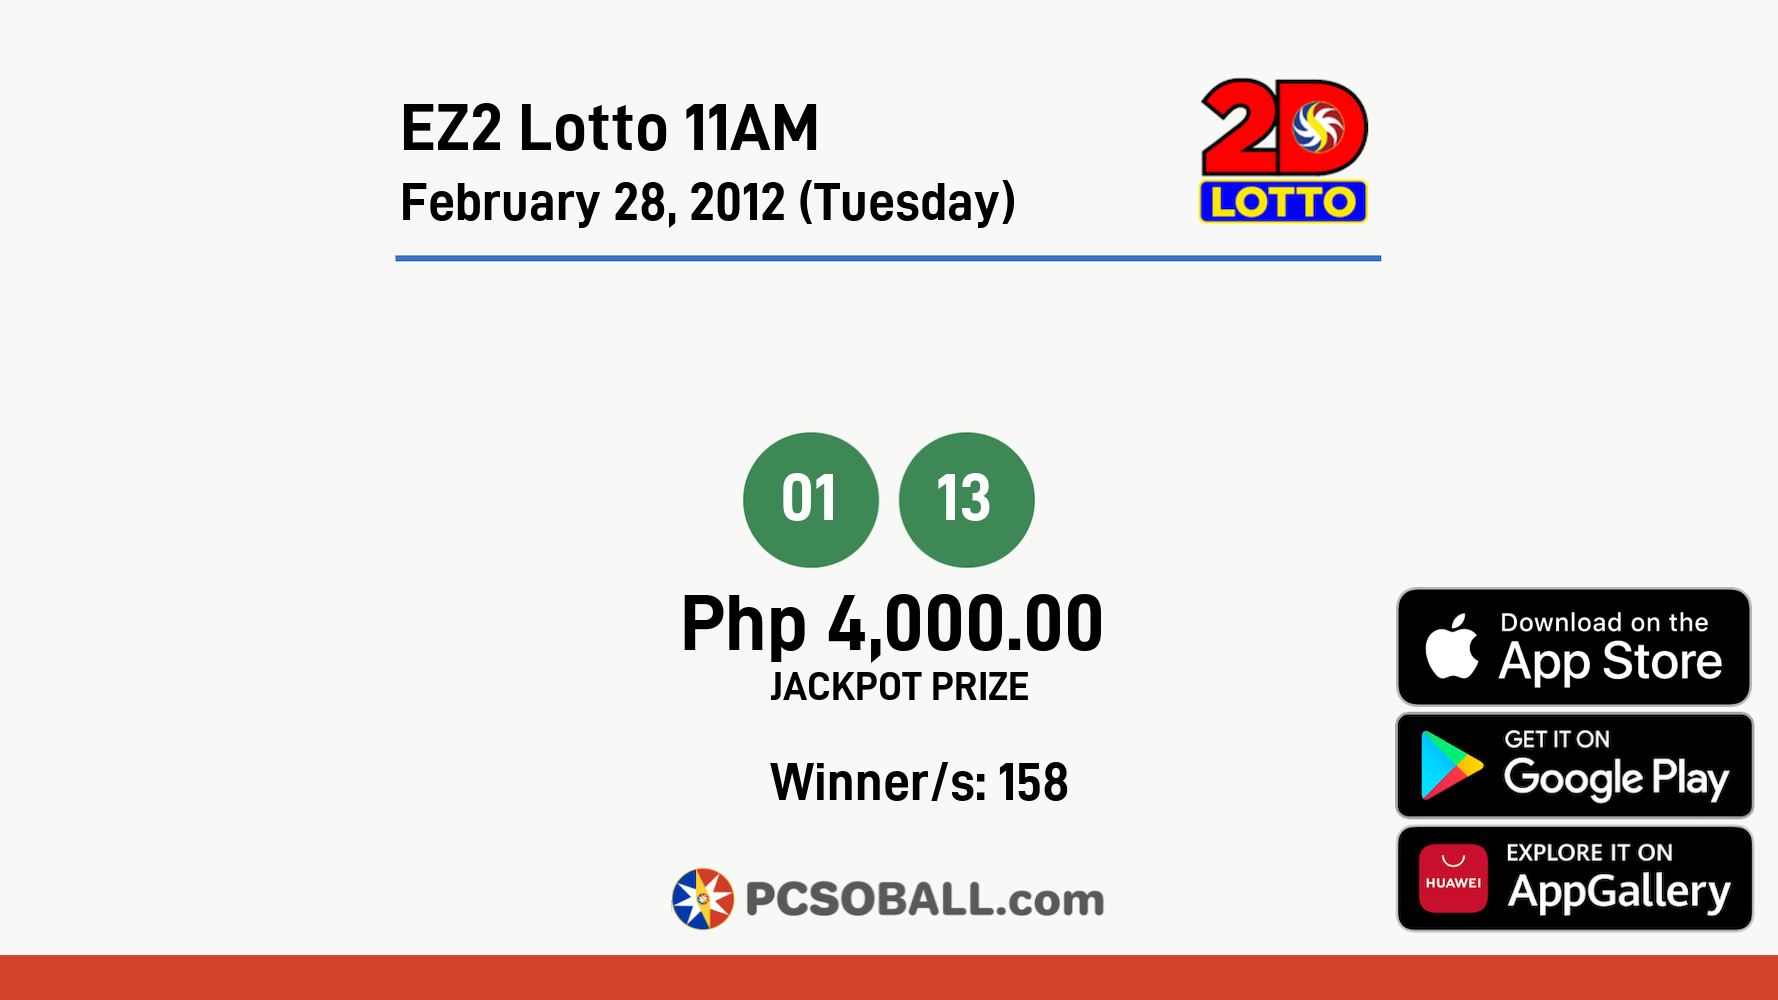 EZ2 Lotto 11AM February 28, 2012 (Tuesday) Result